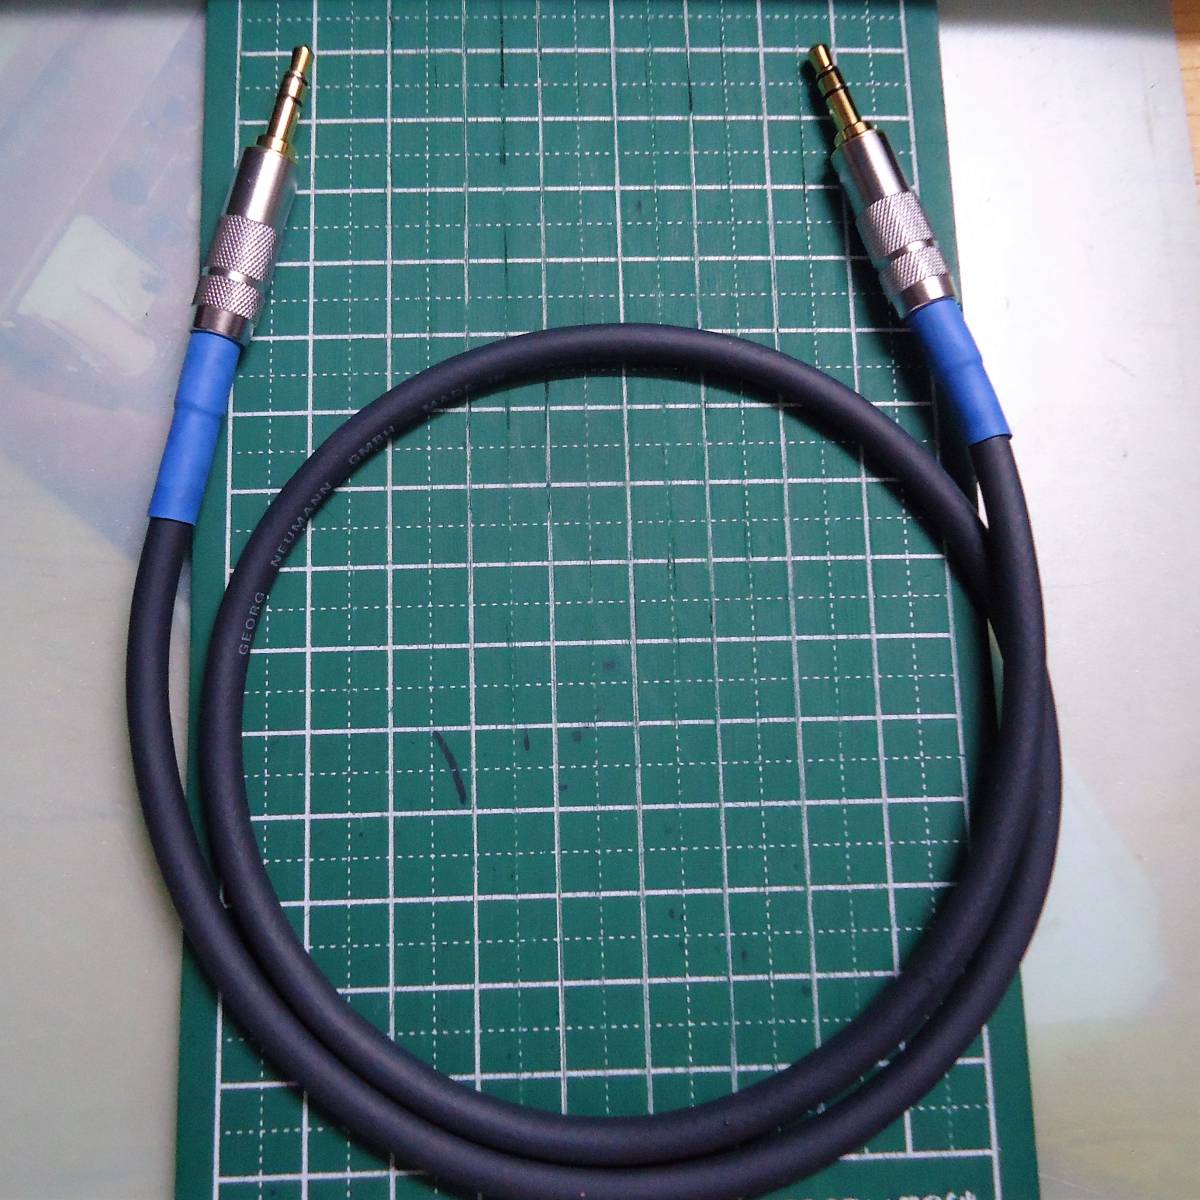  headphone amplifier headphone amplifier for Φ3.5 stereo Mini plug connection cable Neumann cable use (60cm)